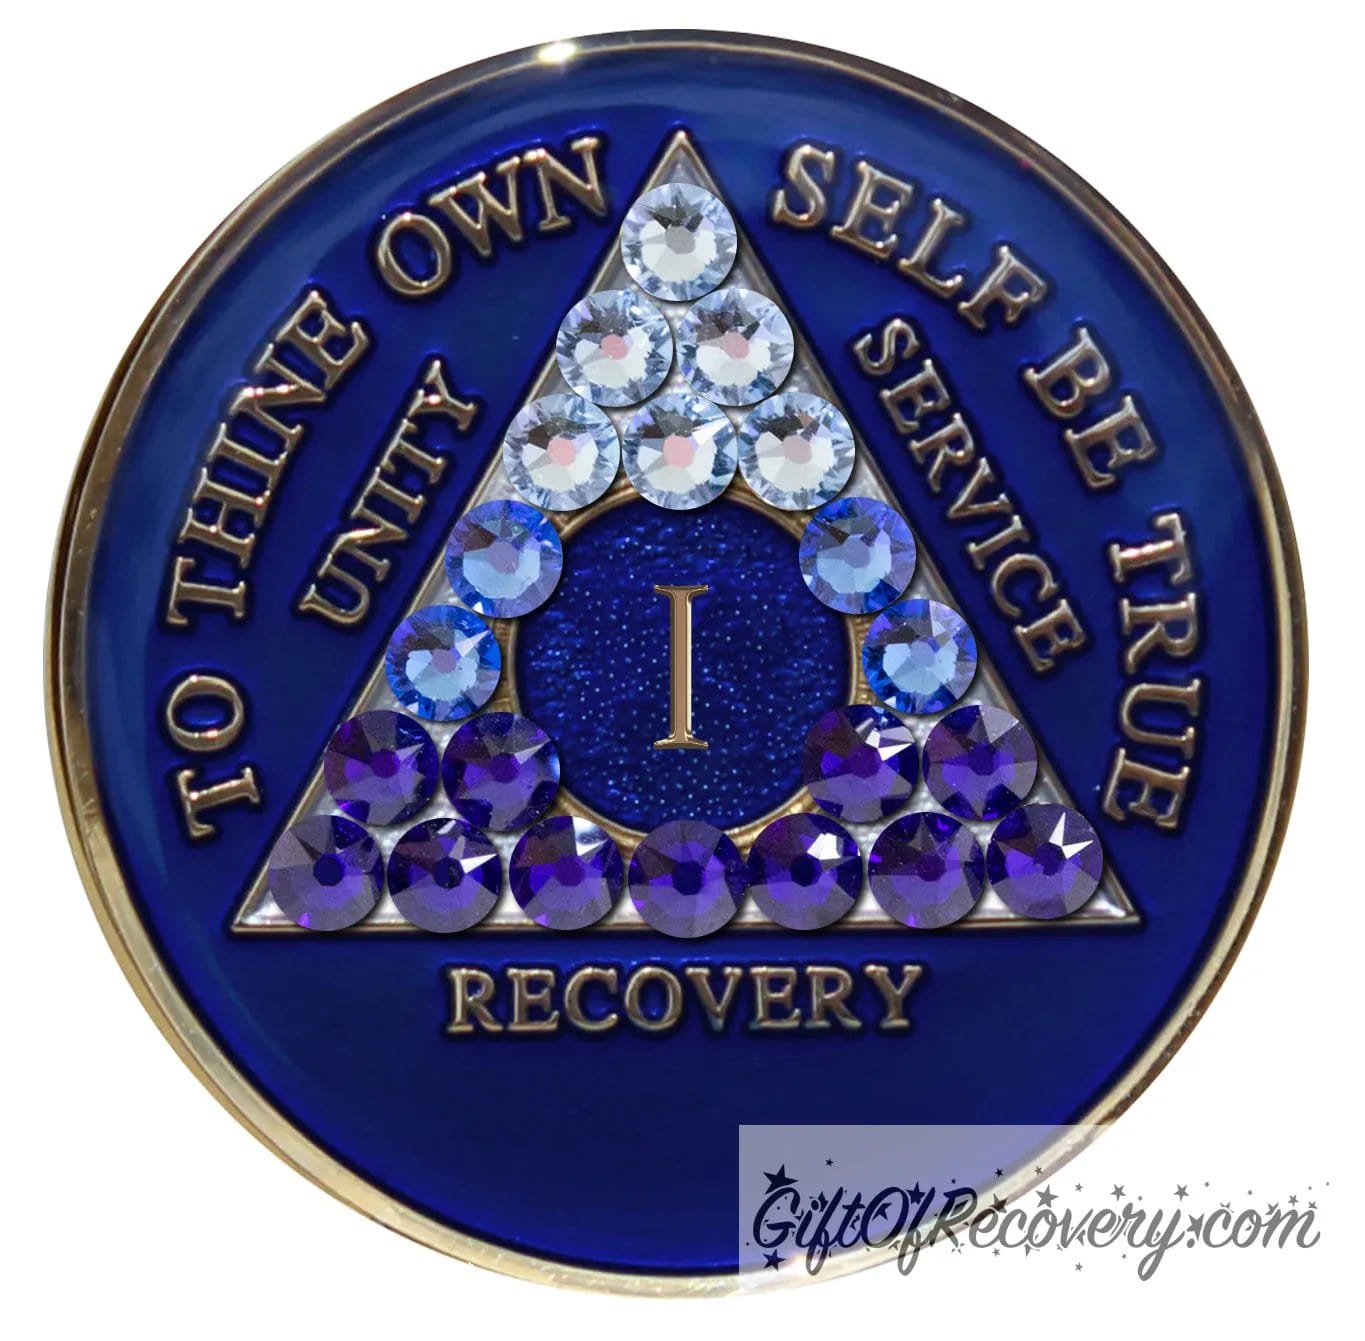 1 year Big Book Blue AA medallion with 21 genuine crystals forming the triangle, going from light to dark blue to represent transitions in your recovery journey, the center circle is blue sparkle, with the roman numeral, AA moto and rim in 14k gold plated brass and resin sealed for a glossy finish.